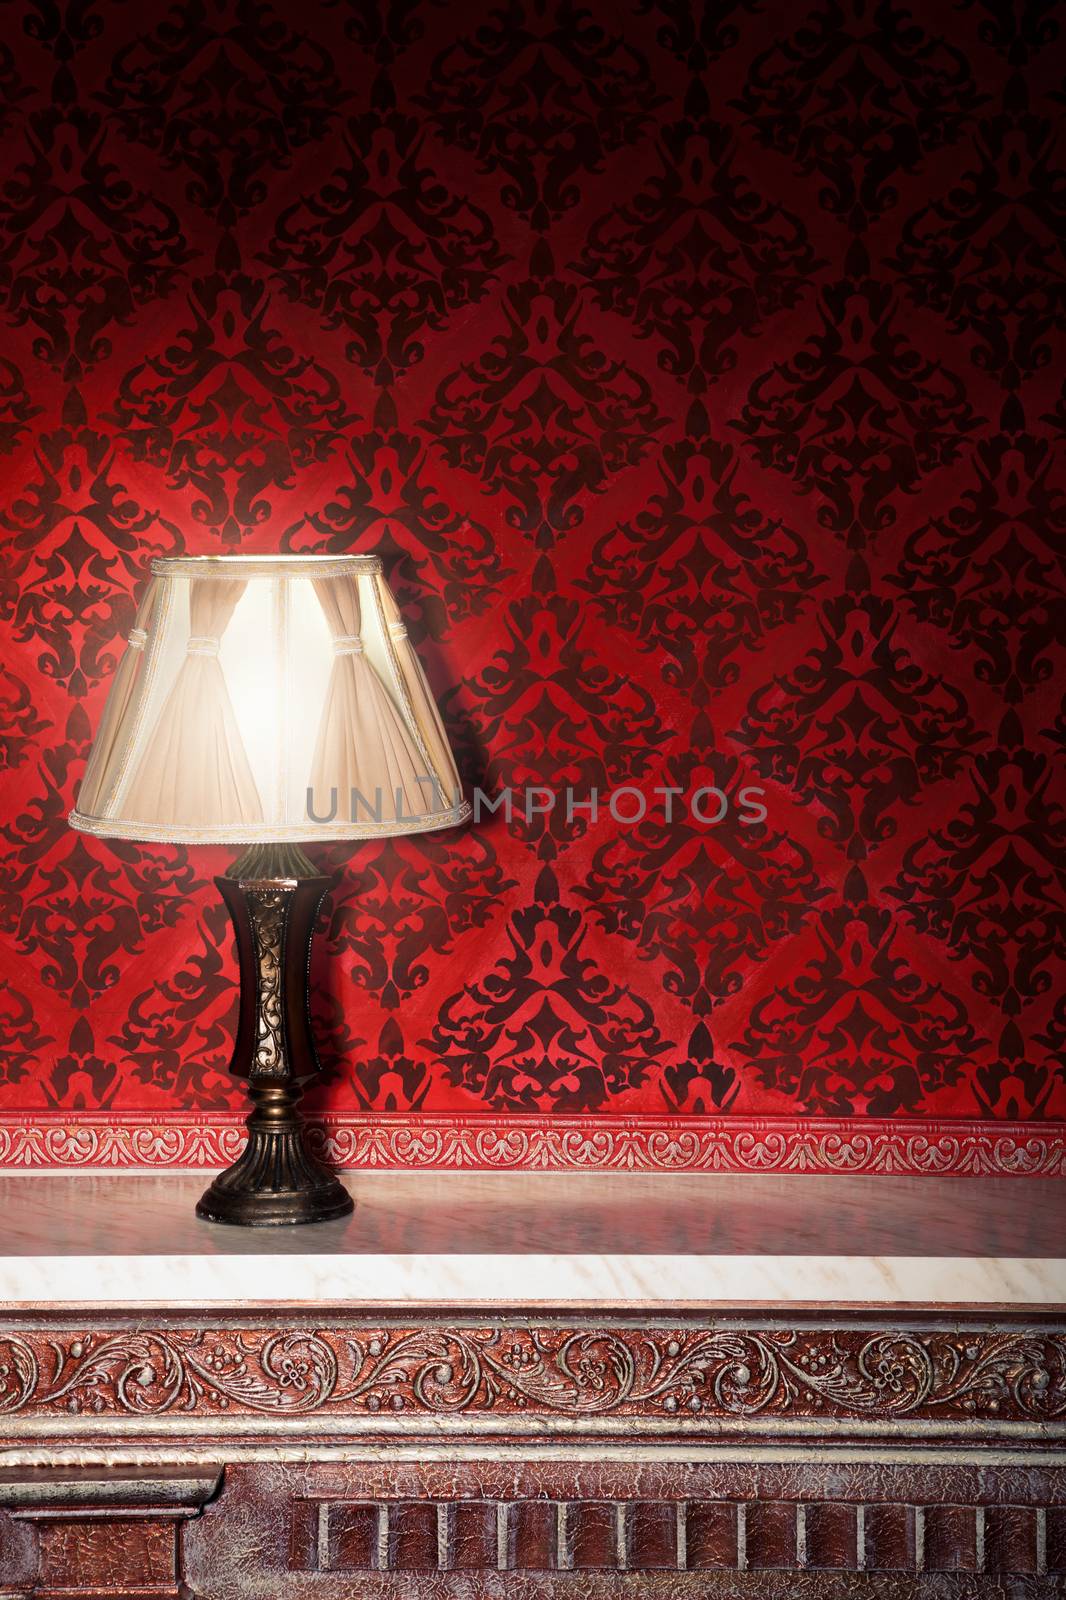 Vintage lamp on old fireplace in room with red rocco pattern. Luxury rocco interior